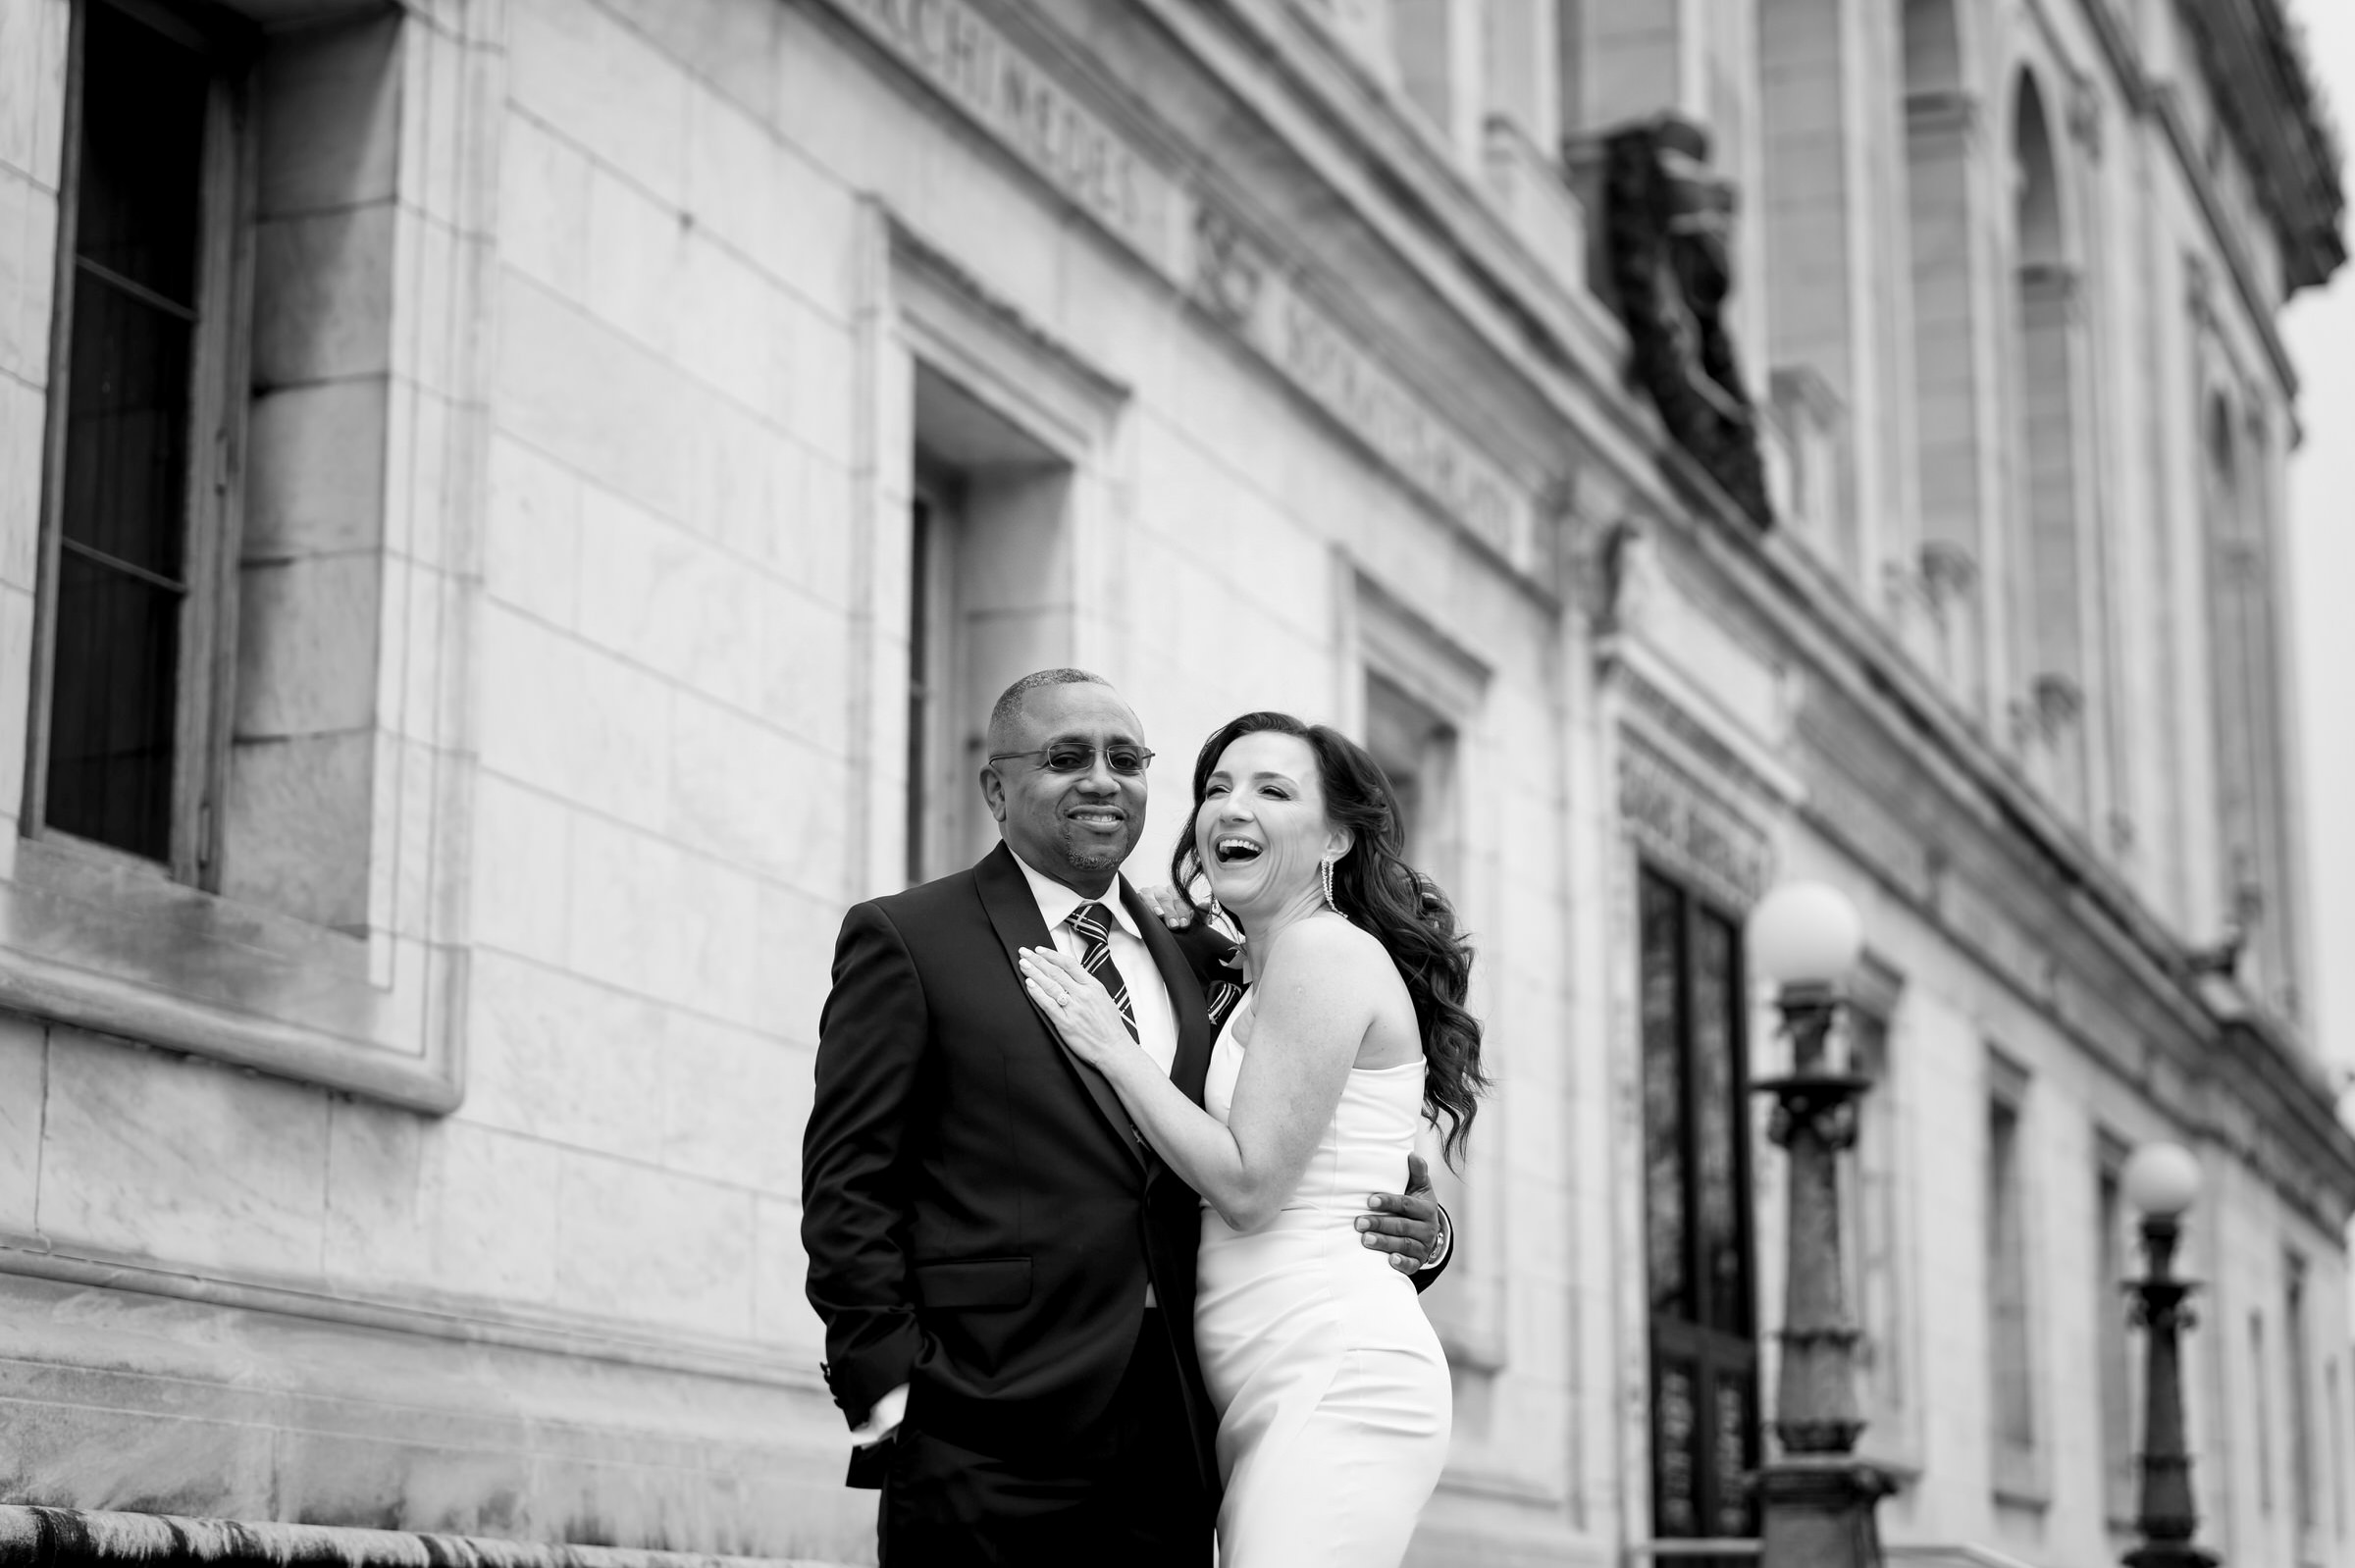 A bride and groom share a laugh on their wedding day outside of the Detroit Public Library on Woodward Ave.  